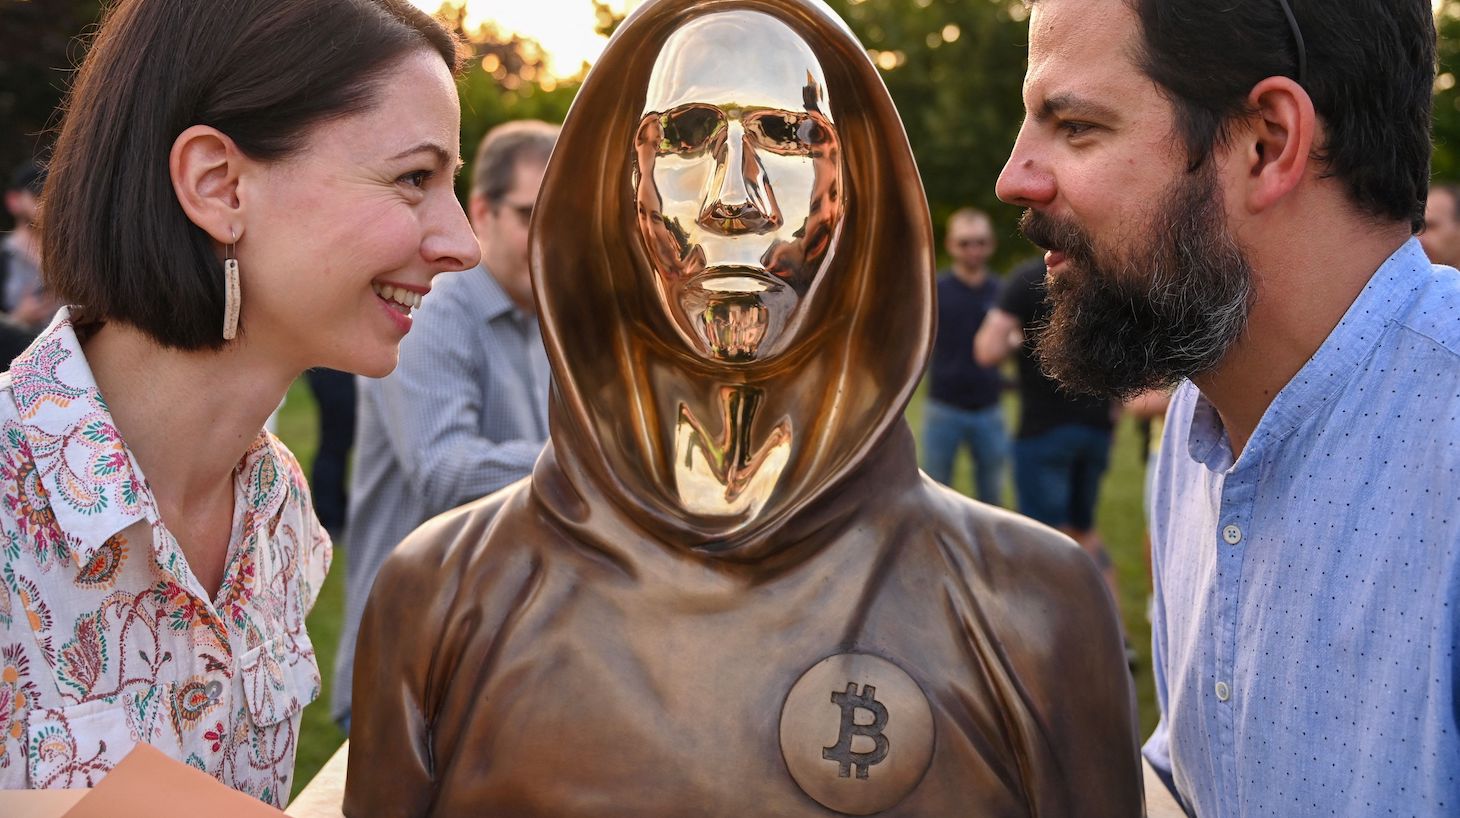 Hungarian sculptors and creators Reka Gergely (L) and Tamas Gilly (R) pose next to the statue of Satoshi Nakamoto, the mysterious inventor of the virtual currency bitcoin, after its unveiling at the Graphisoft Park in Budapest, on September 16, 2021. - Hungarian bitcoin enthusiasts unveiled a statue on September 16 in Budapest that they say is the first in the world to honour Satoshi Nakamoto, the mysterious inventor of the virtual currency. The bronze life-size sculpture depicts a hooded figure with stylised facial features, alluding to Nakamoto, a pseudonym credited as bitcoin's founder, but whose identity remains unknown. (Photo by ATTILA KISBENEDEK / AFP) (Photo by ATTILA KISBENEDEK/AFP via Getty Images)